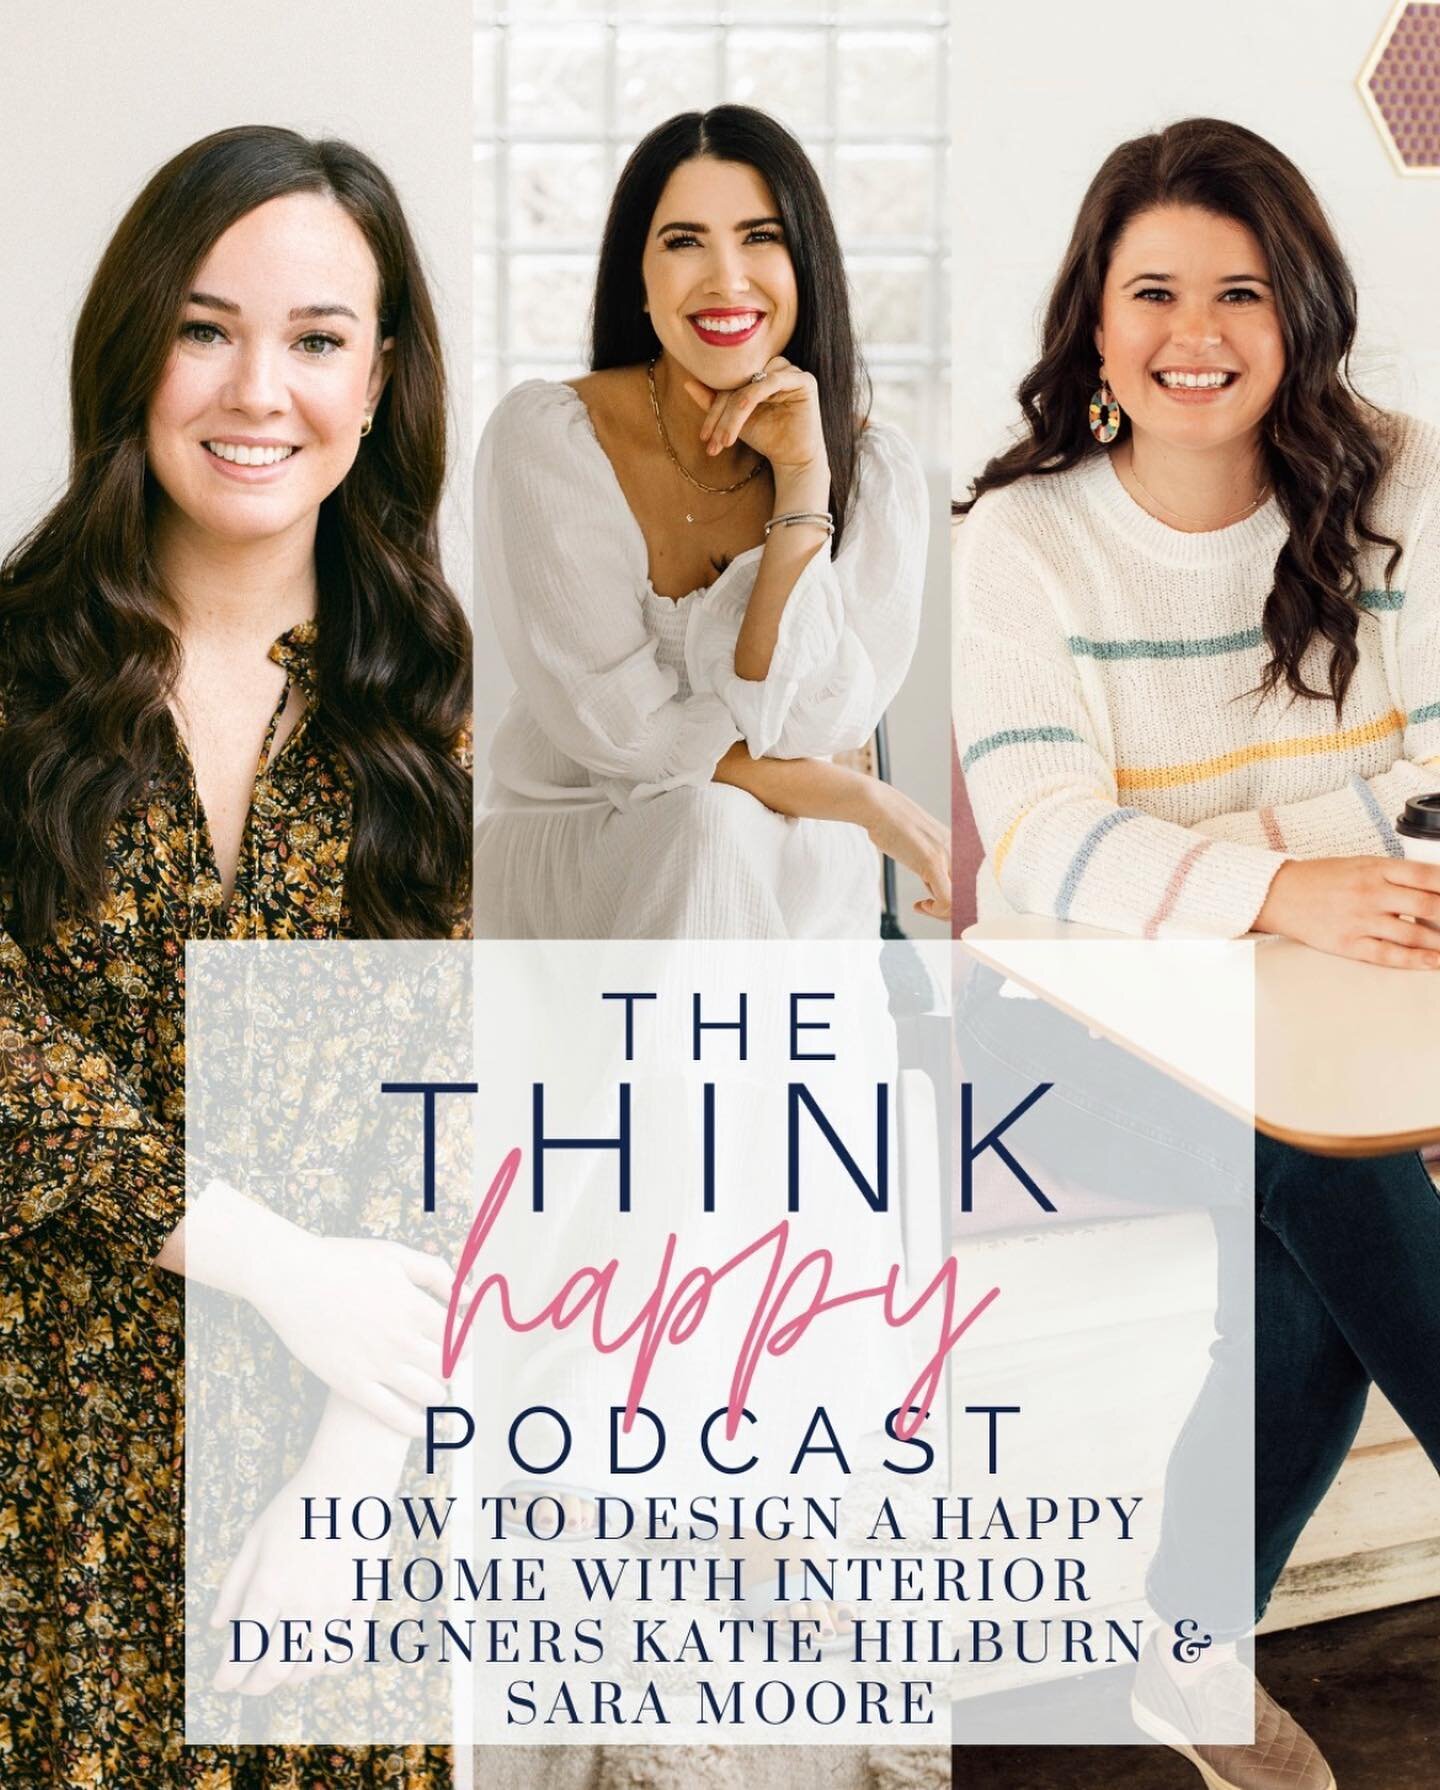 We are so excited to share episode one of our podcast with @thinkhappy_co 
Tune in to learn a little bit more about Sara &amp; I while we give a few designer tips too! 
.
.
https://thinkhappyco.com/podcast #interiordesigner #interiordesign #houstonde